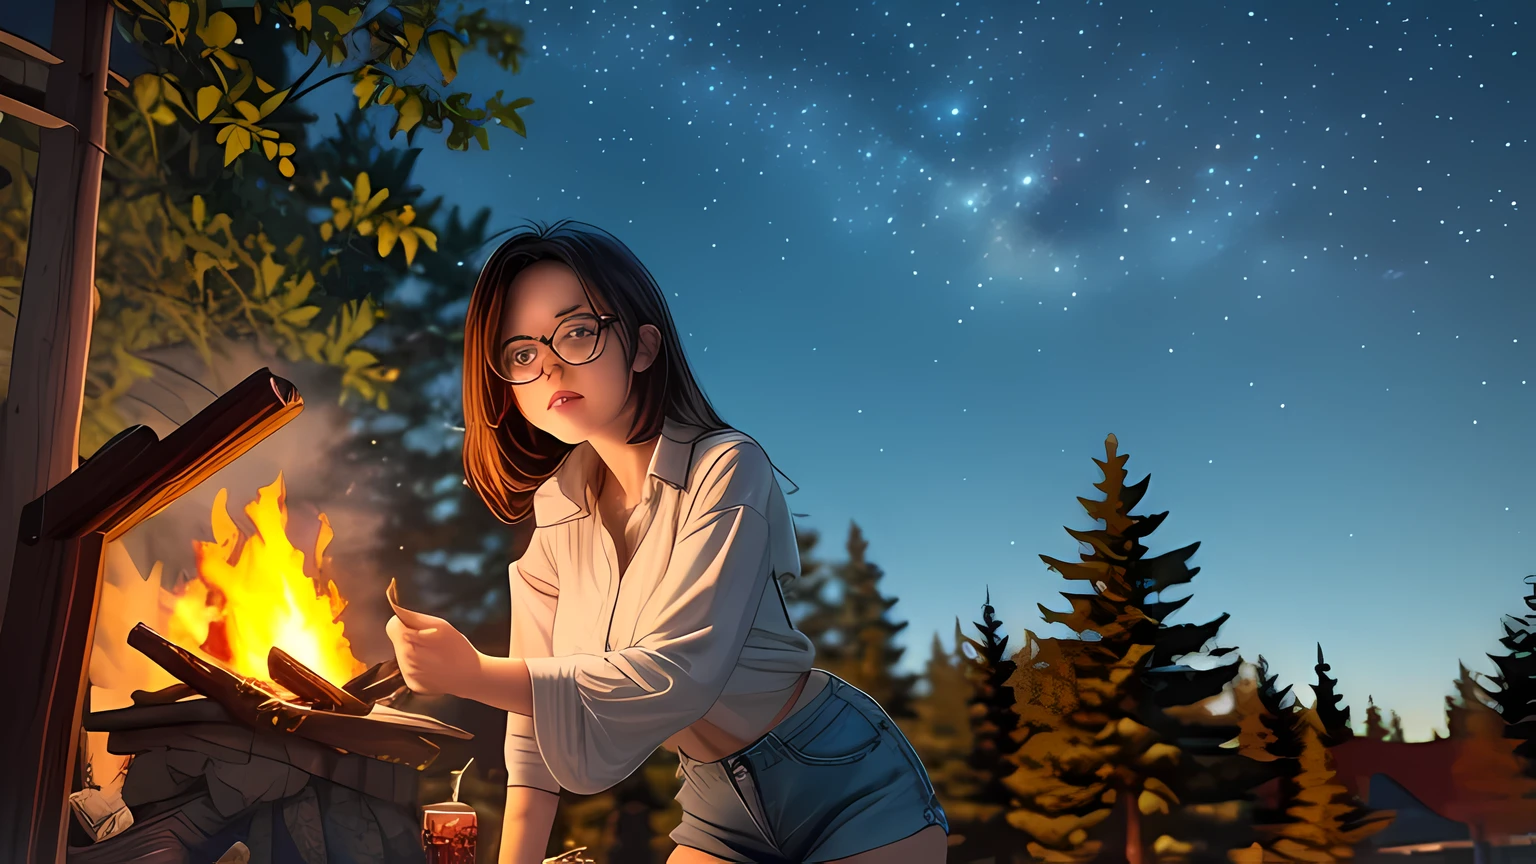 Solo, female, standing near, campfire, (smoky wind), flannel shirt, jeans, scruffy beard, carbonated glasses, marshmallow in hand, night sky above, orange and yellow leaves surrounding, autumn scene, camping gear nearby, crackling sound of the fire, peaceful, by Bebebebebe, by Spikes, By Darkgem, by Mystic Fox 61, by Chunie, deep focus, warm light from the fire illuminating the face, detailed shadows, clear night sky, stars twinkling, crisp autumn air, nostalgic atmosphere, (explicit content, adult, nsfw), high contrast, cinematic, denim skirt